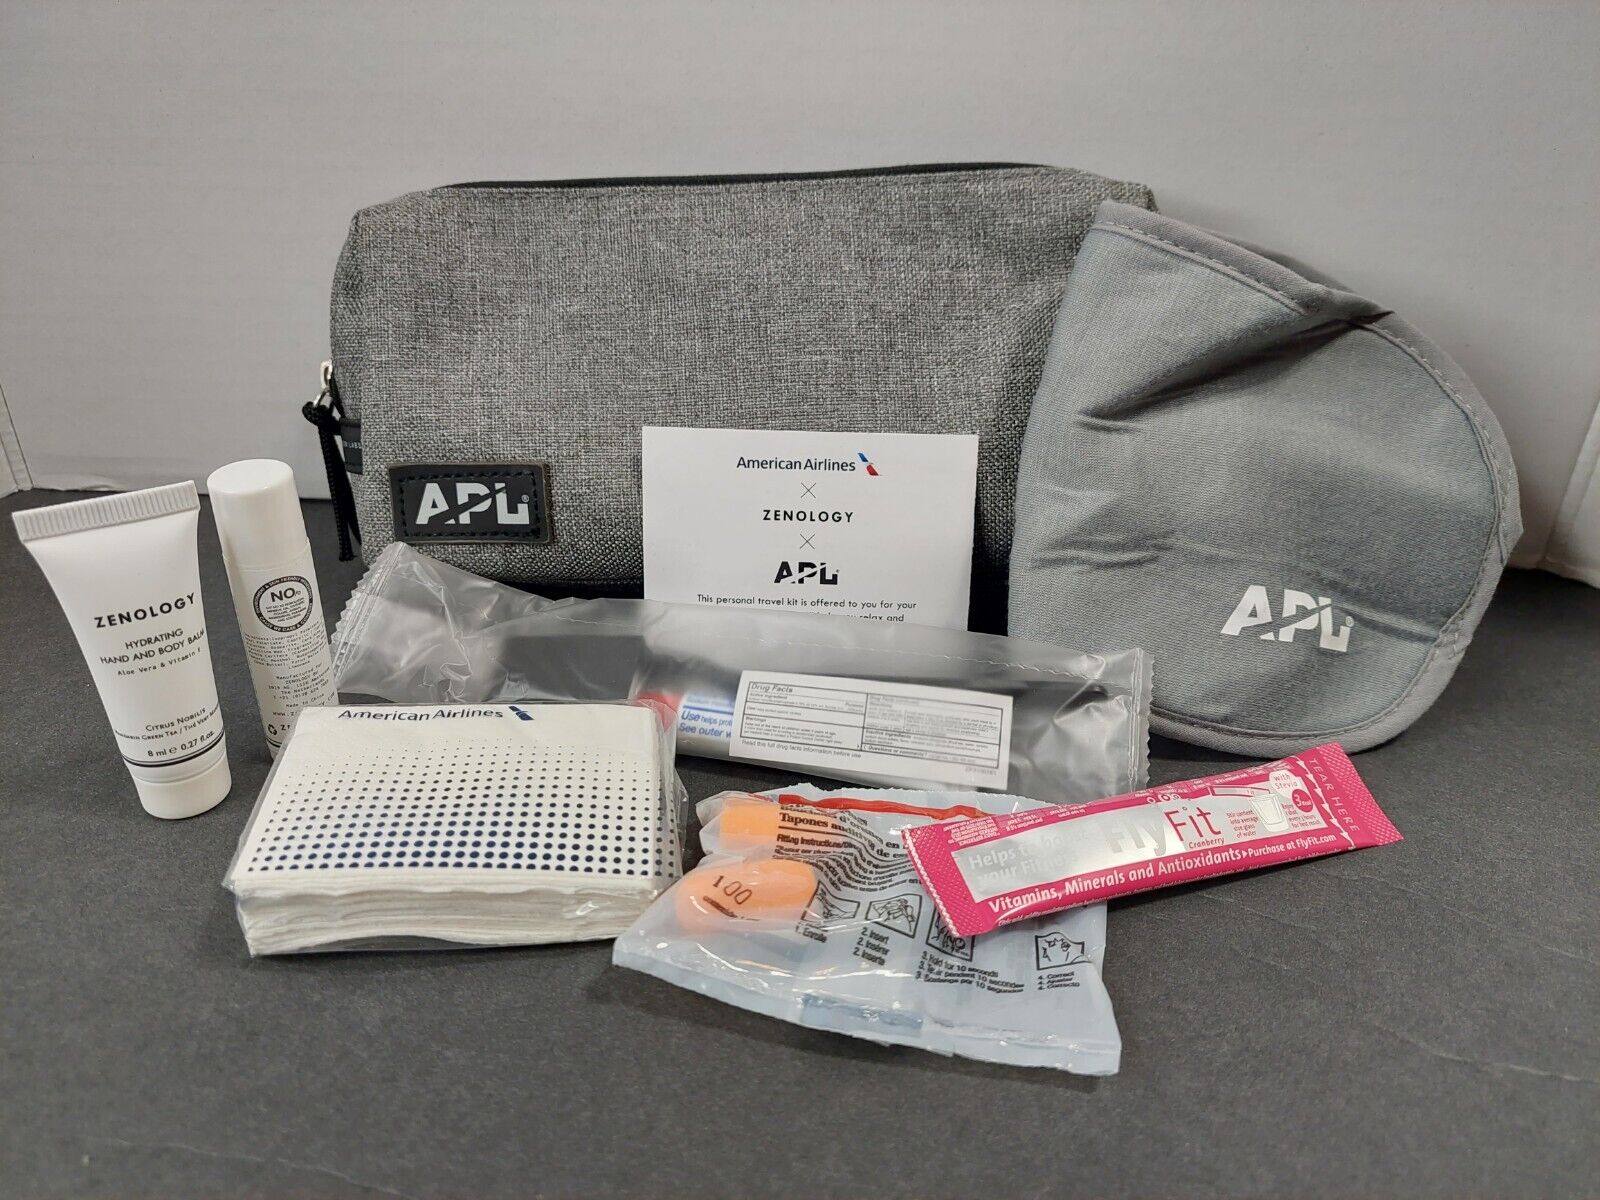 American Airlines x APL Business Class Amenity Kit Bag - Gray